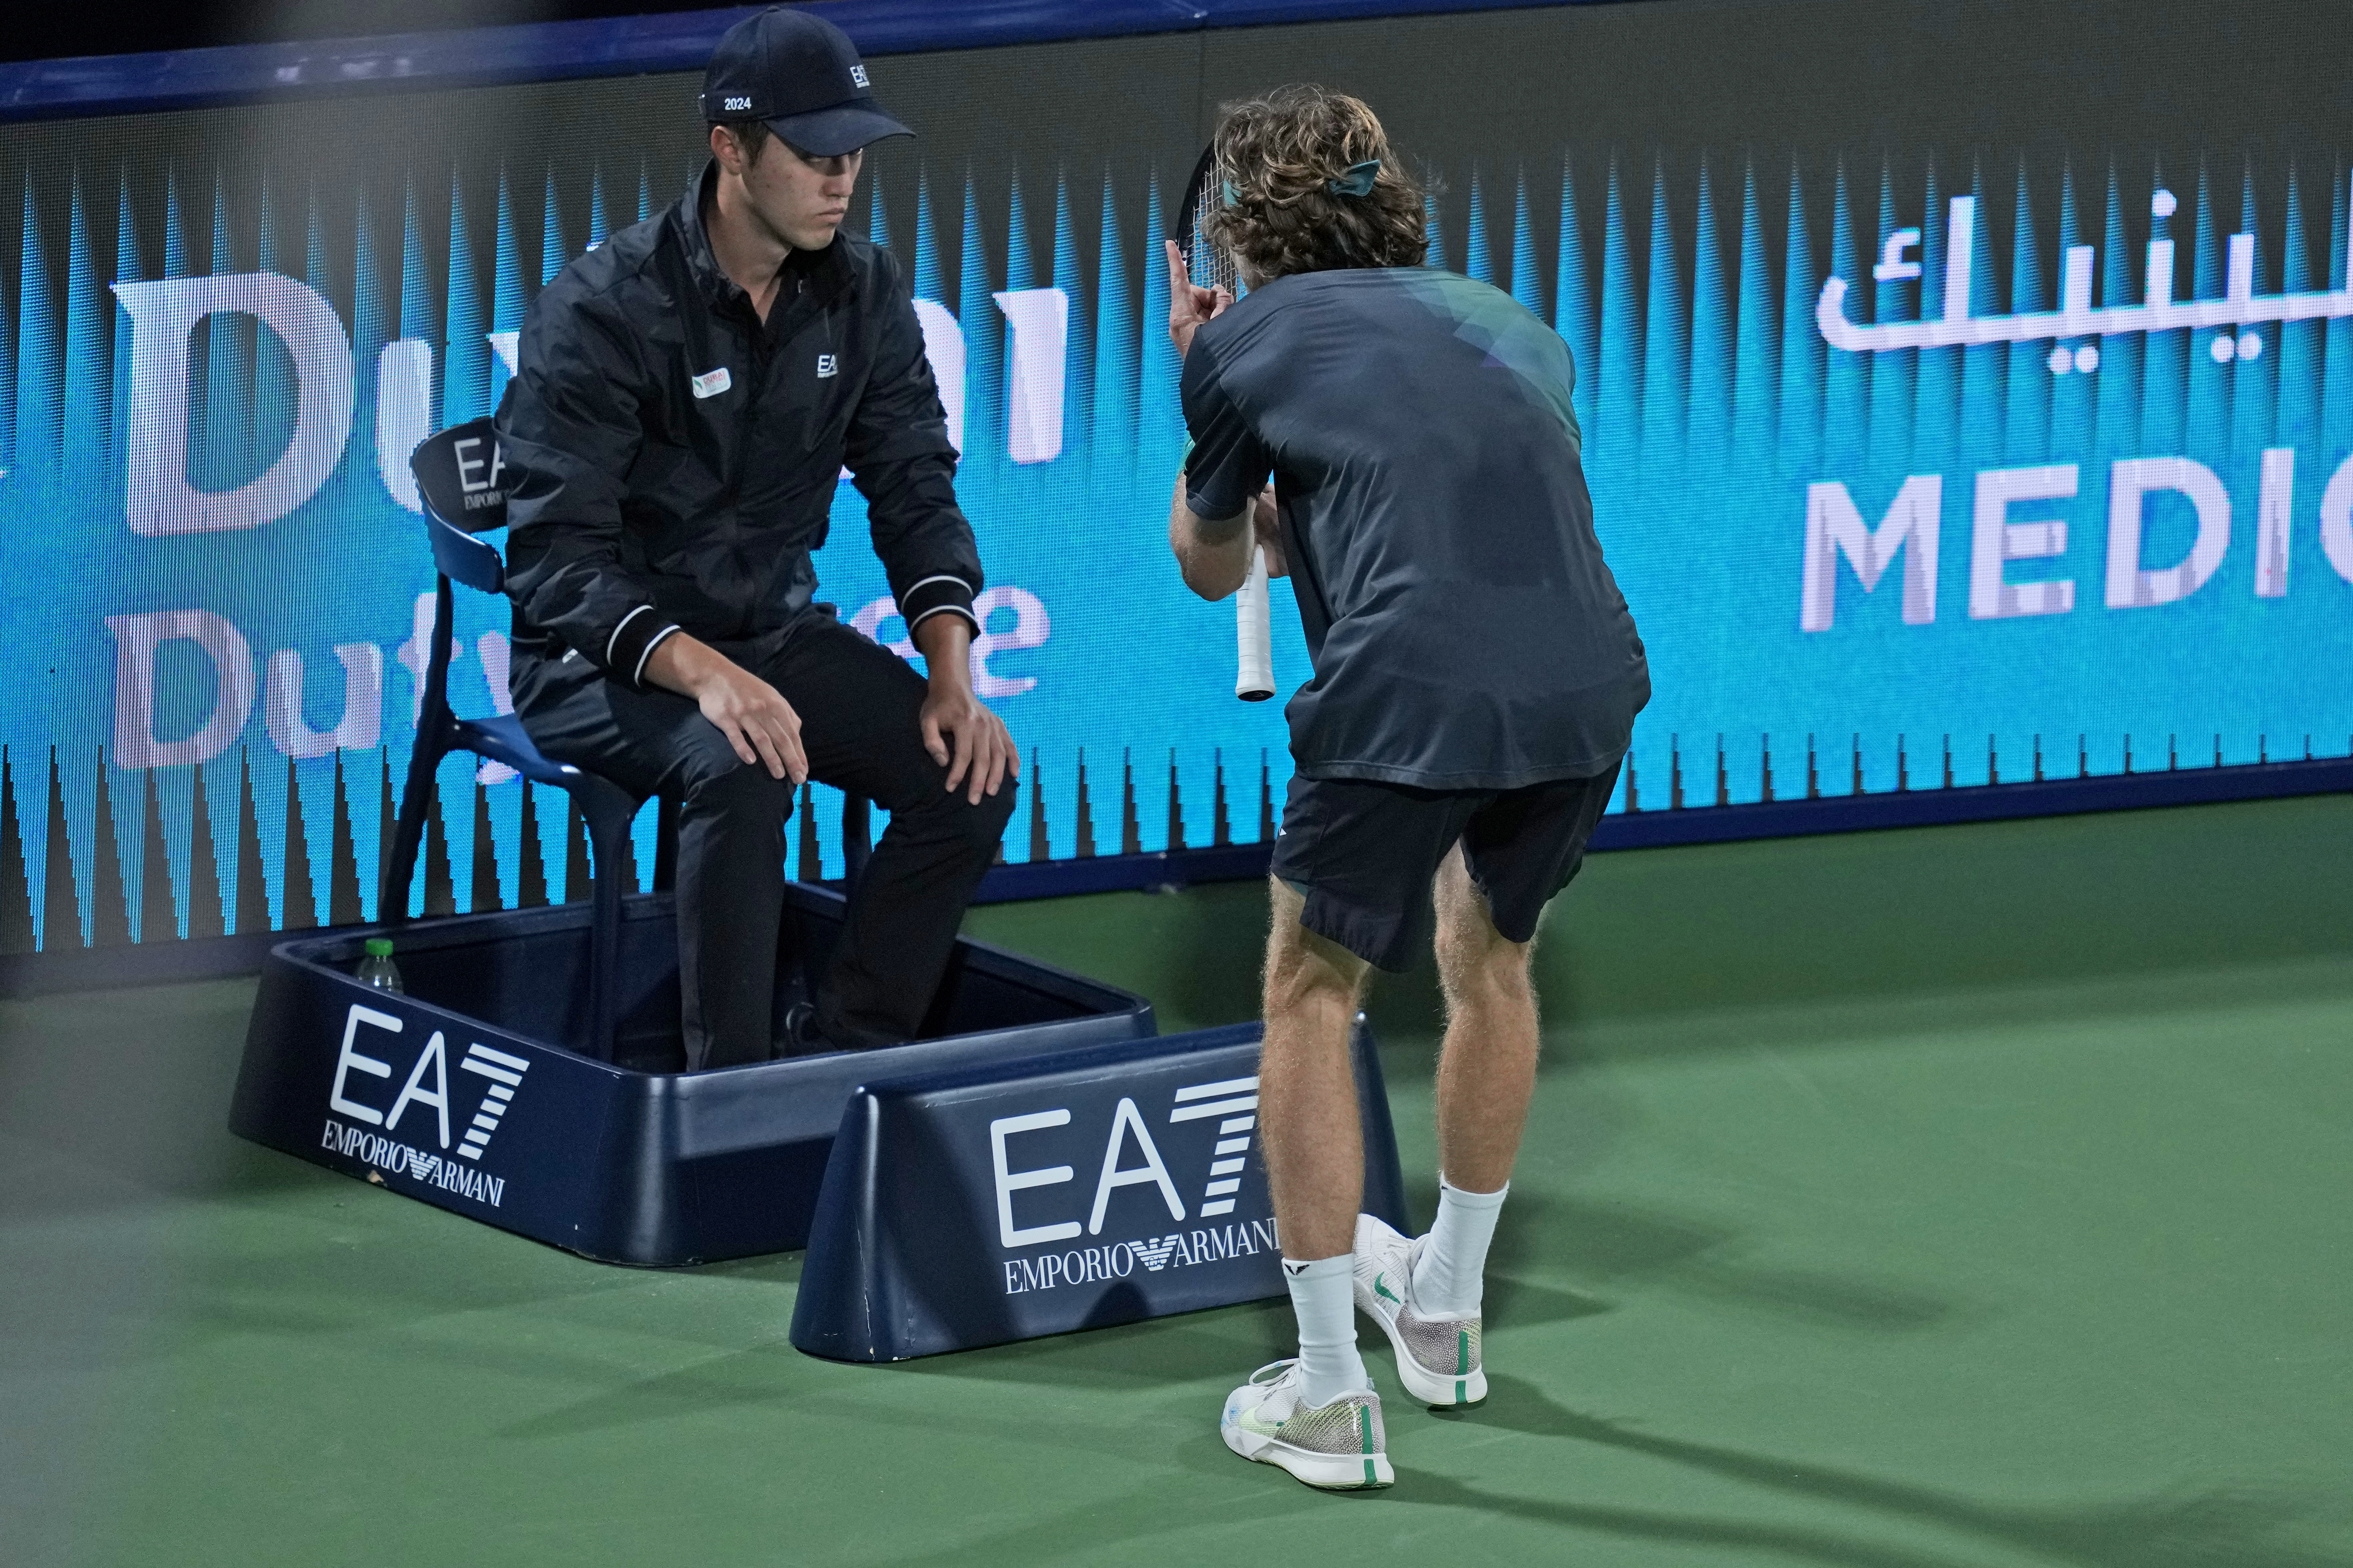 Andrey Rublev appeared to say something to a line judge